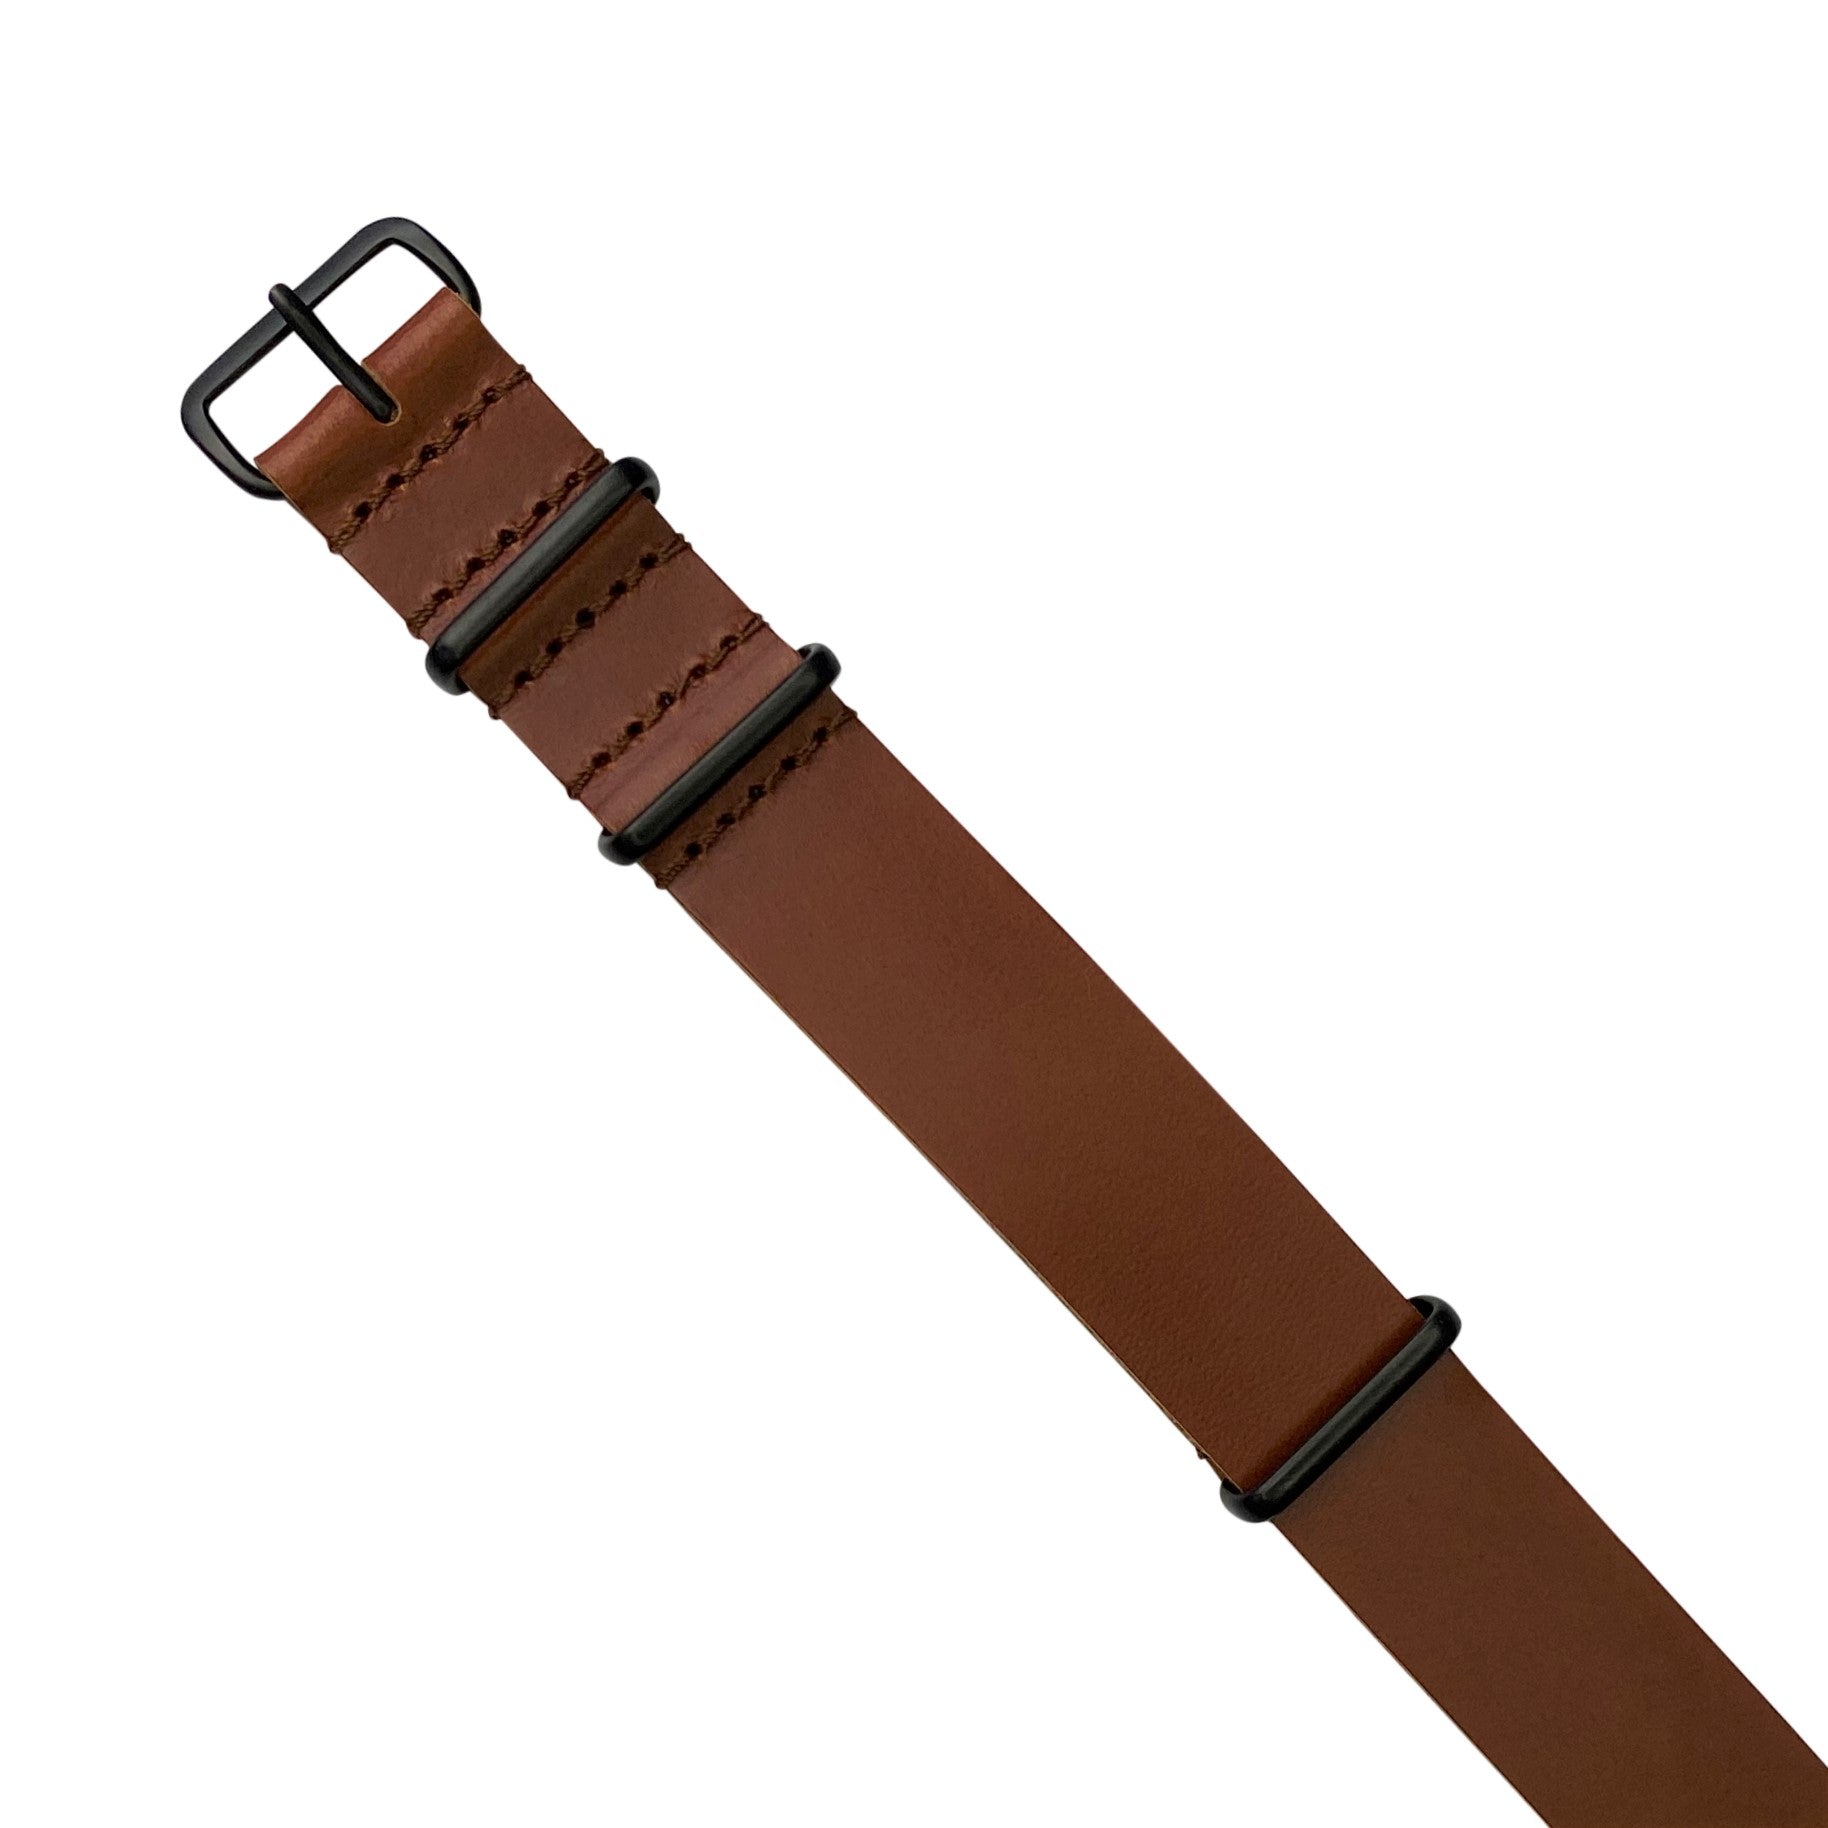 Premium Leather Nato Strap in Tan - Nomad Watch Works SG